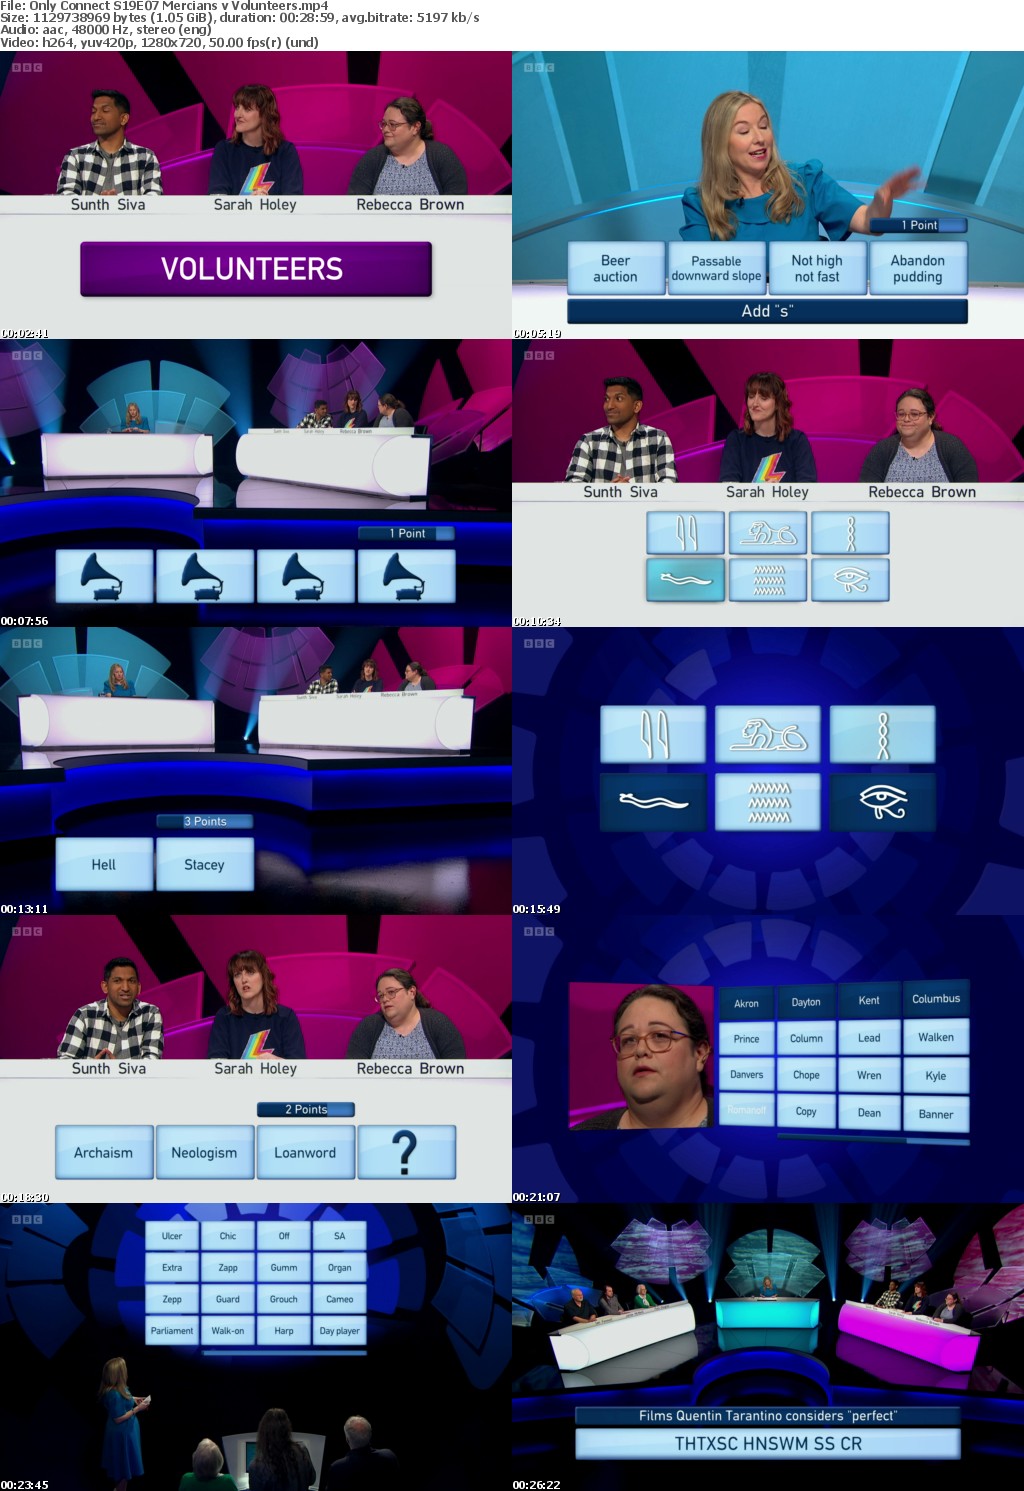 Only Connect S19E07 Mercians v Volunteers (1280x720p HD, 50fps, soft Eng subs)